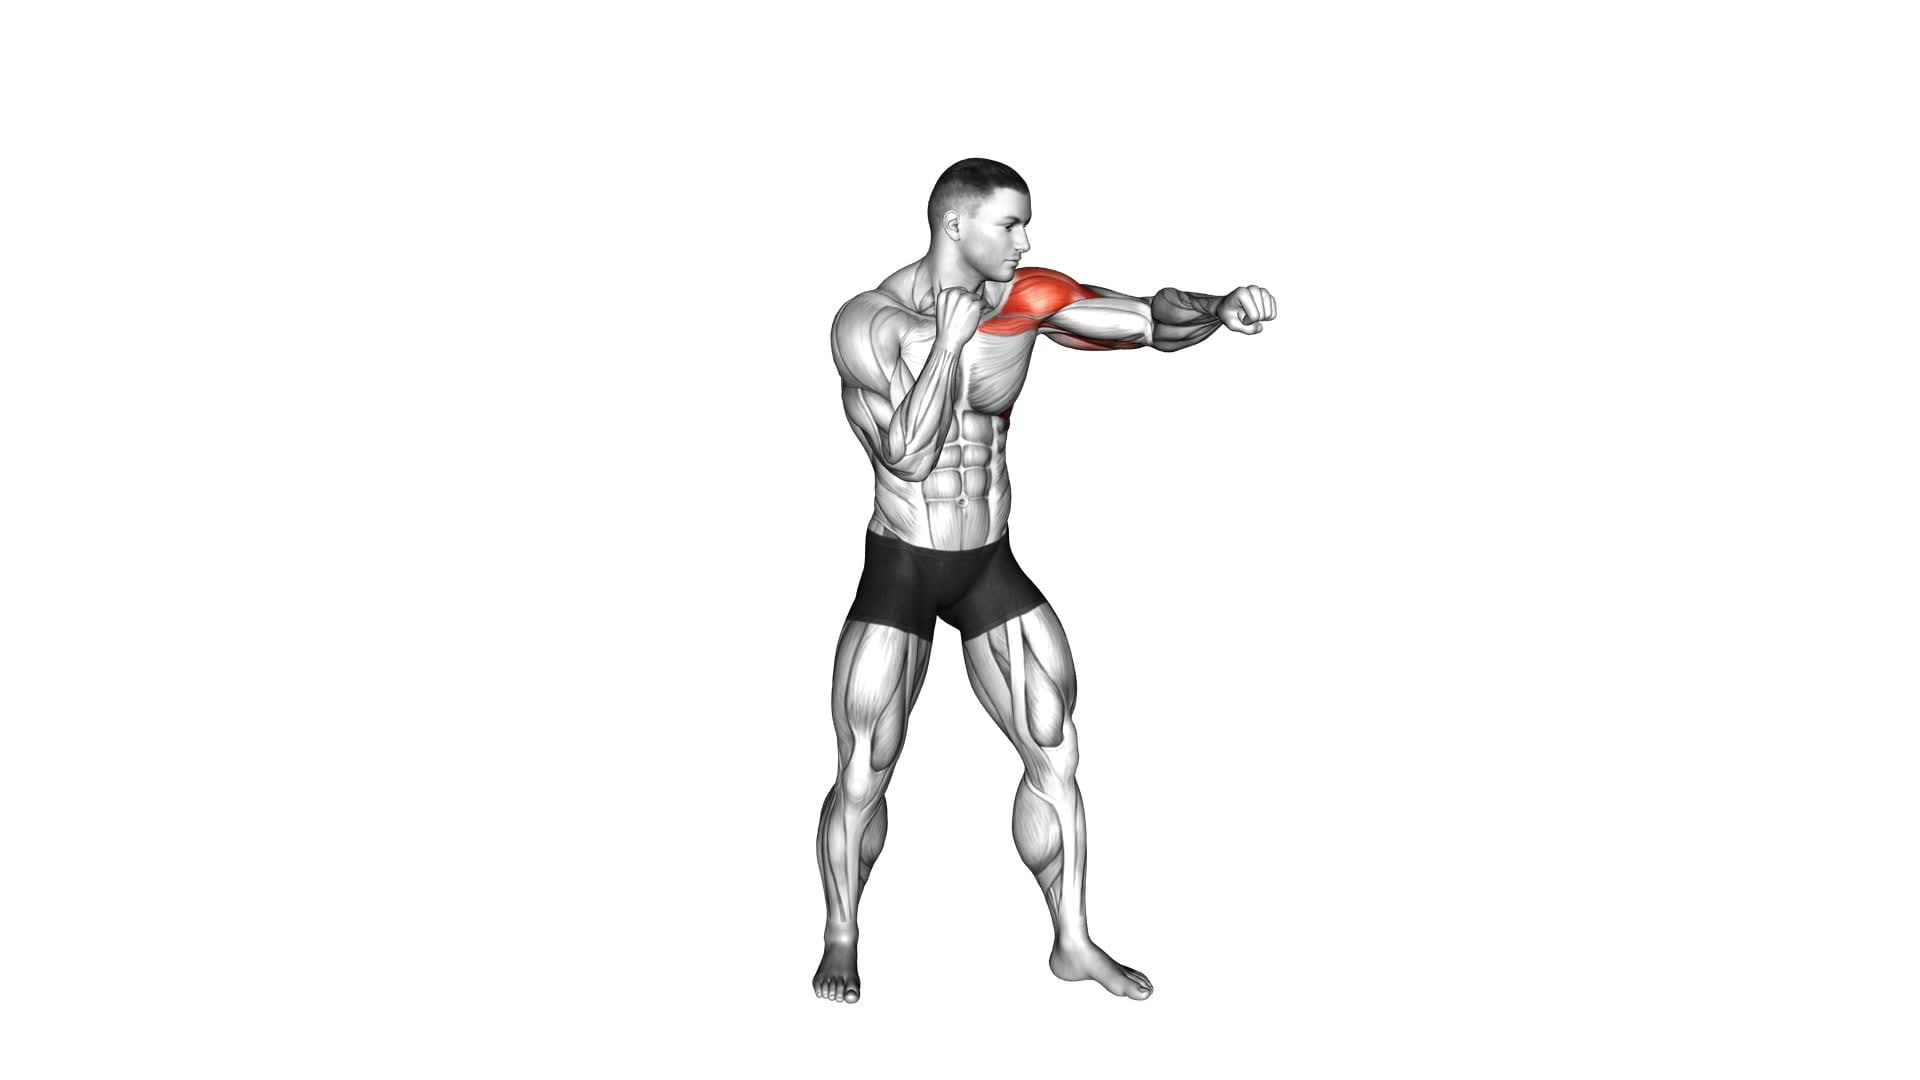 Boxing Jab - Video Exercise Guide & Tips